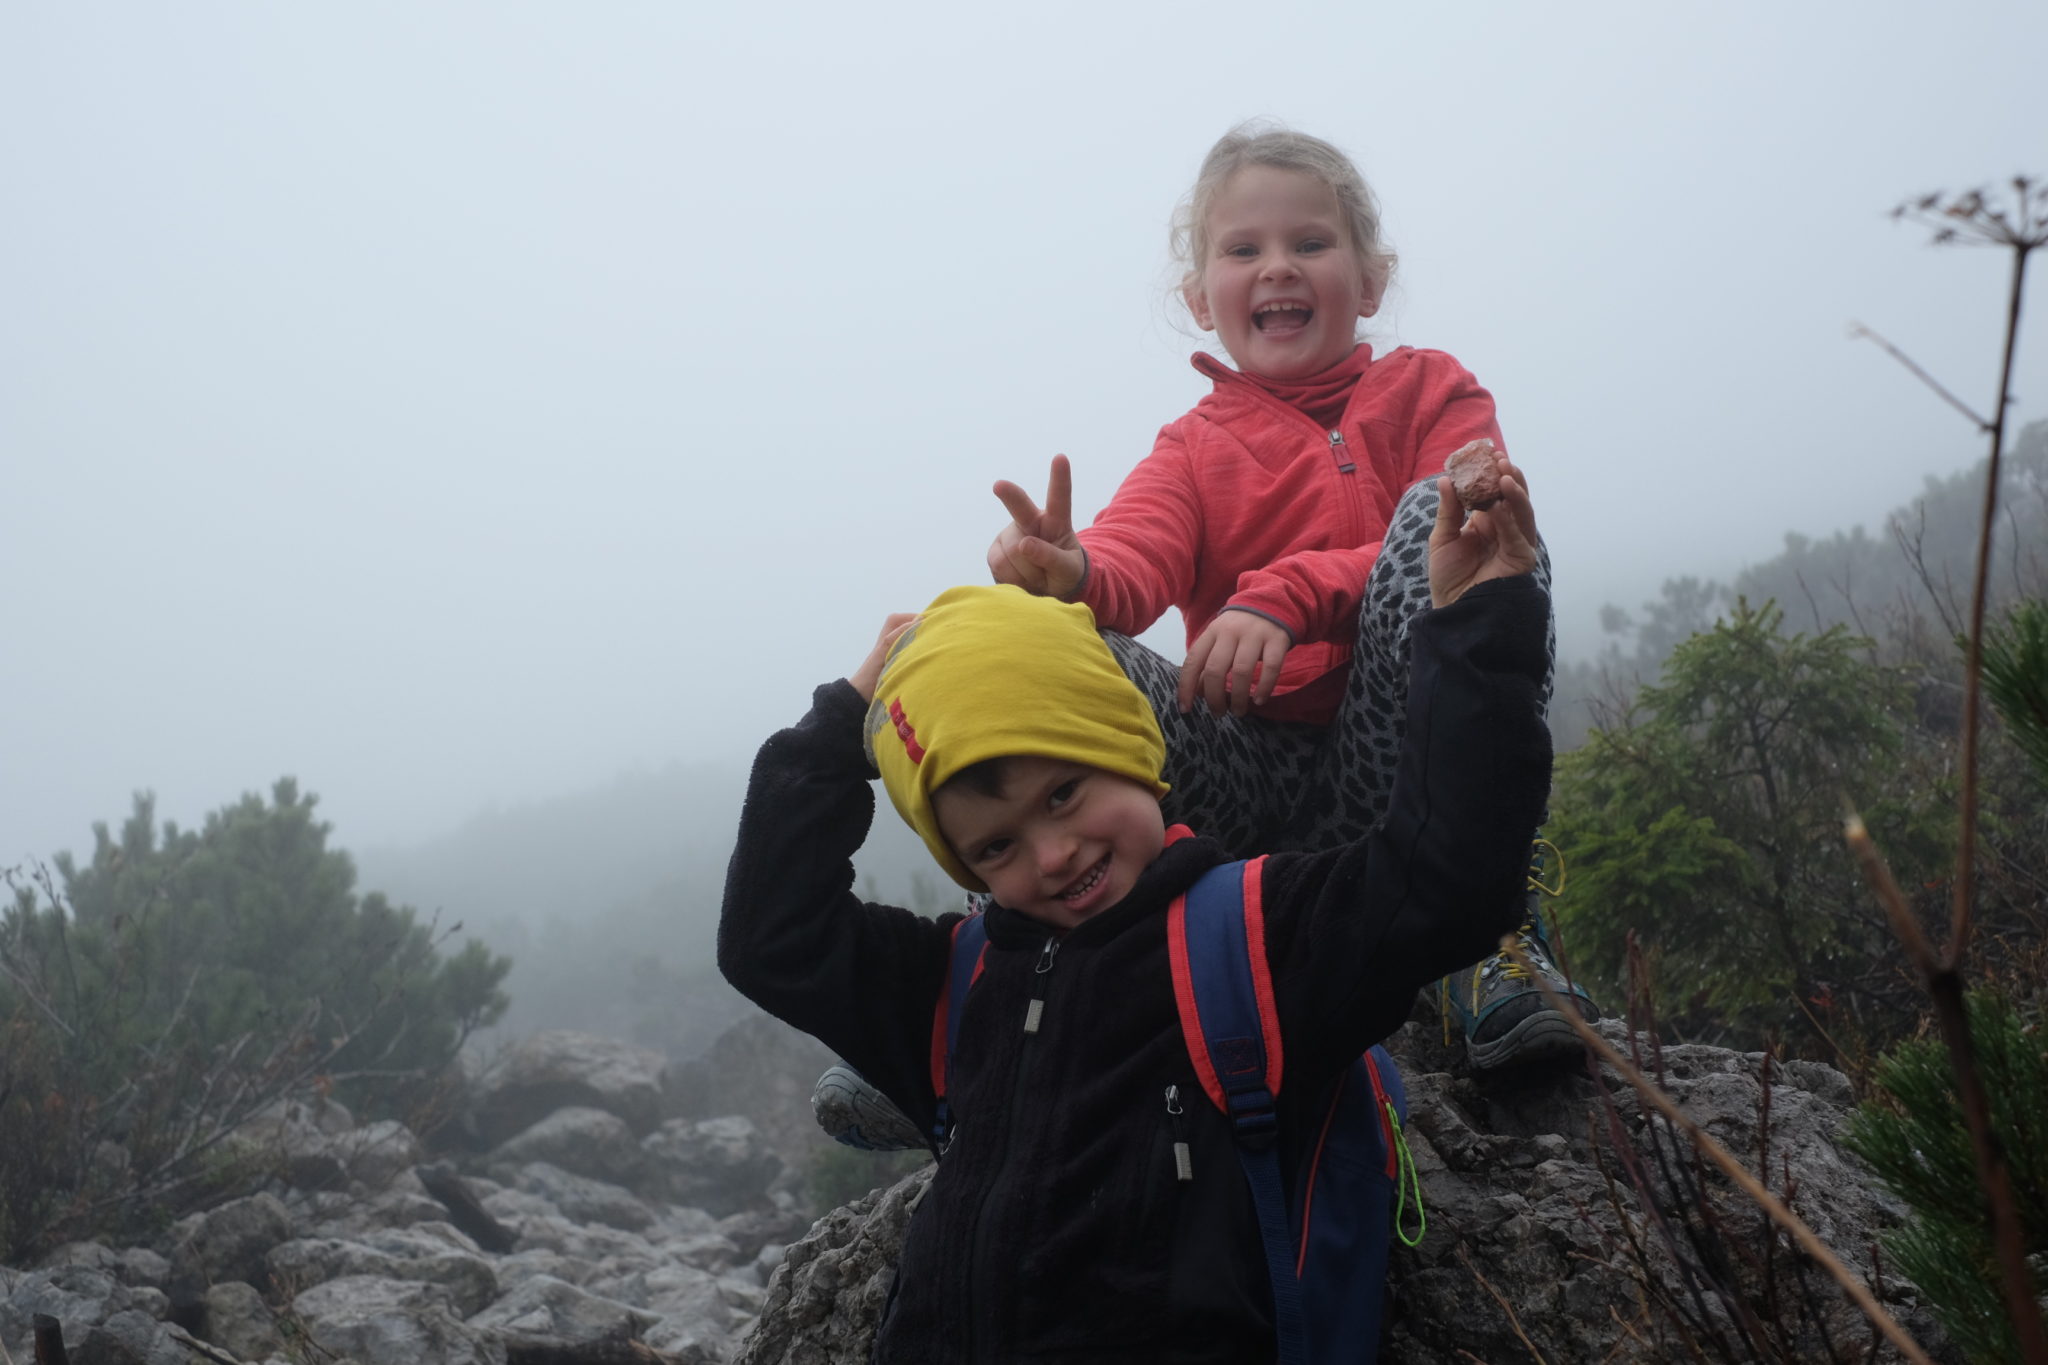 Kids having fun in the mountains. Photo by: Exploring Slovenia